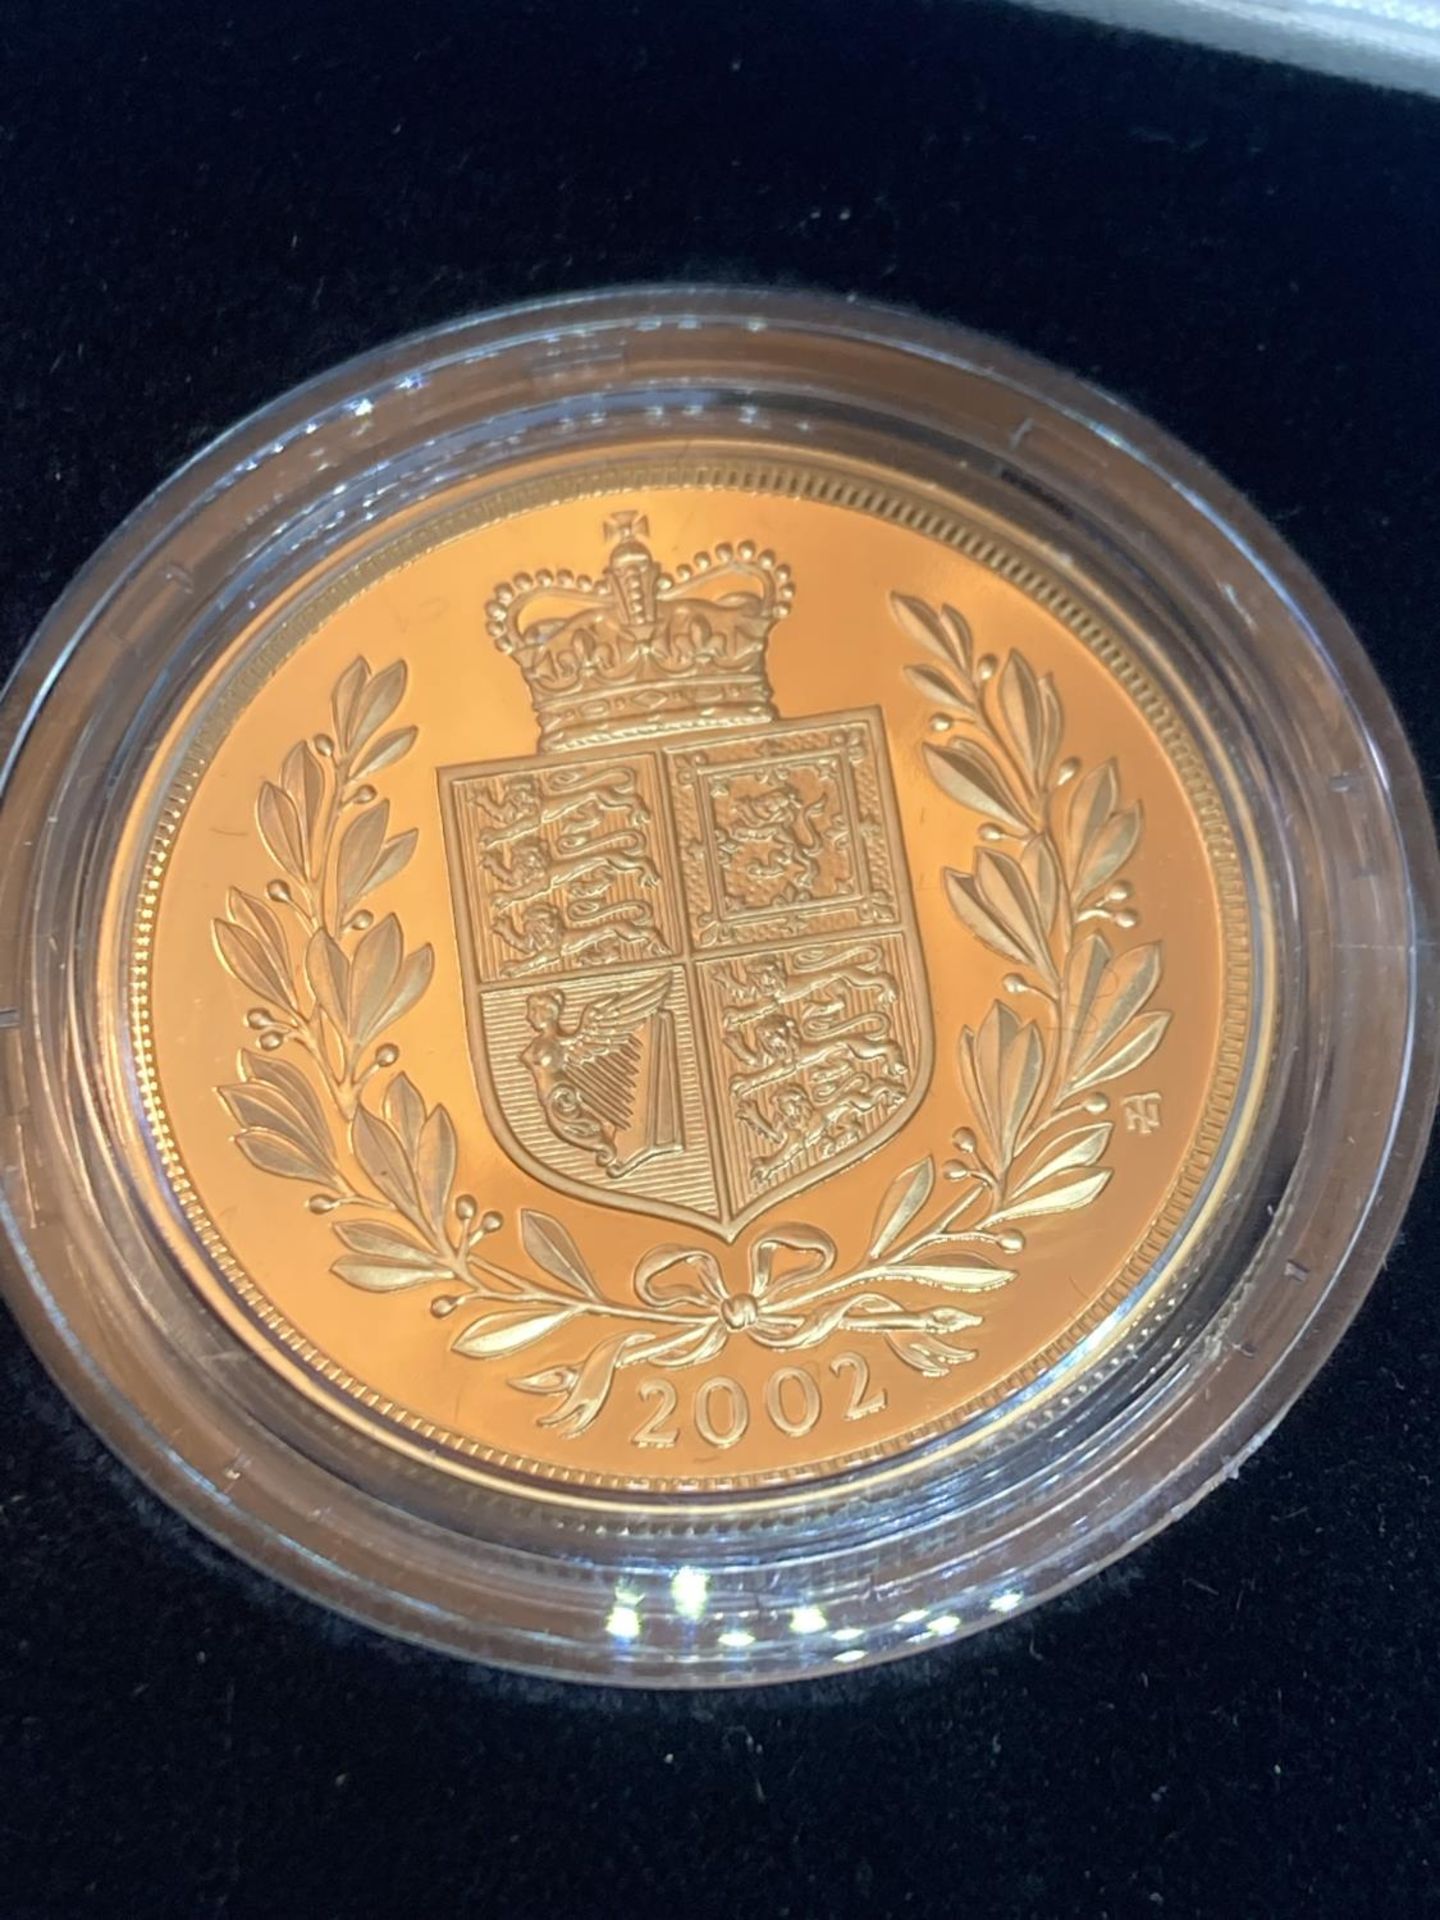 A 2002 ROYAL MINT GOLD PROOF FOUR COIN COLLECTION CELEBRATING QUEEN ELIZABETH II GOLDEN JUBILEE TO - Image 2 of 11